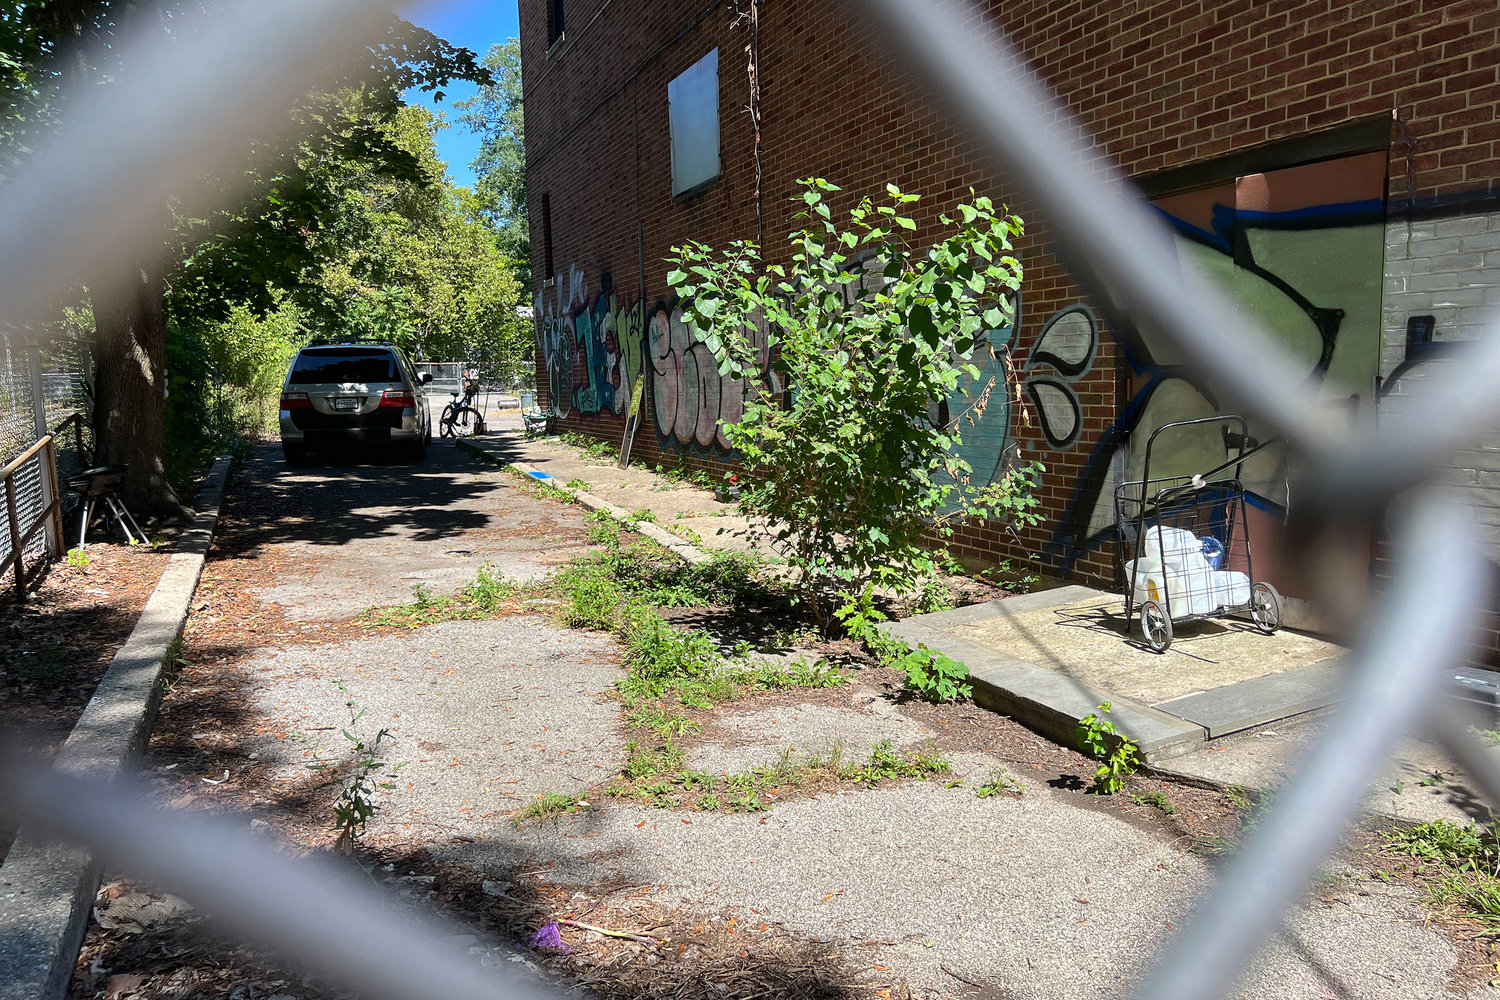 A van was parked in the driveway of the former Church of the Visitation parish school Aug. Tishman Speyer said they hired the van driver to provide security at the property until demolition begins.